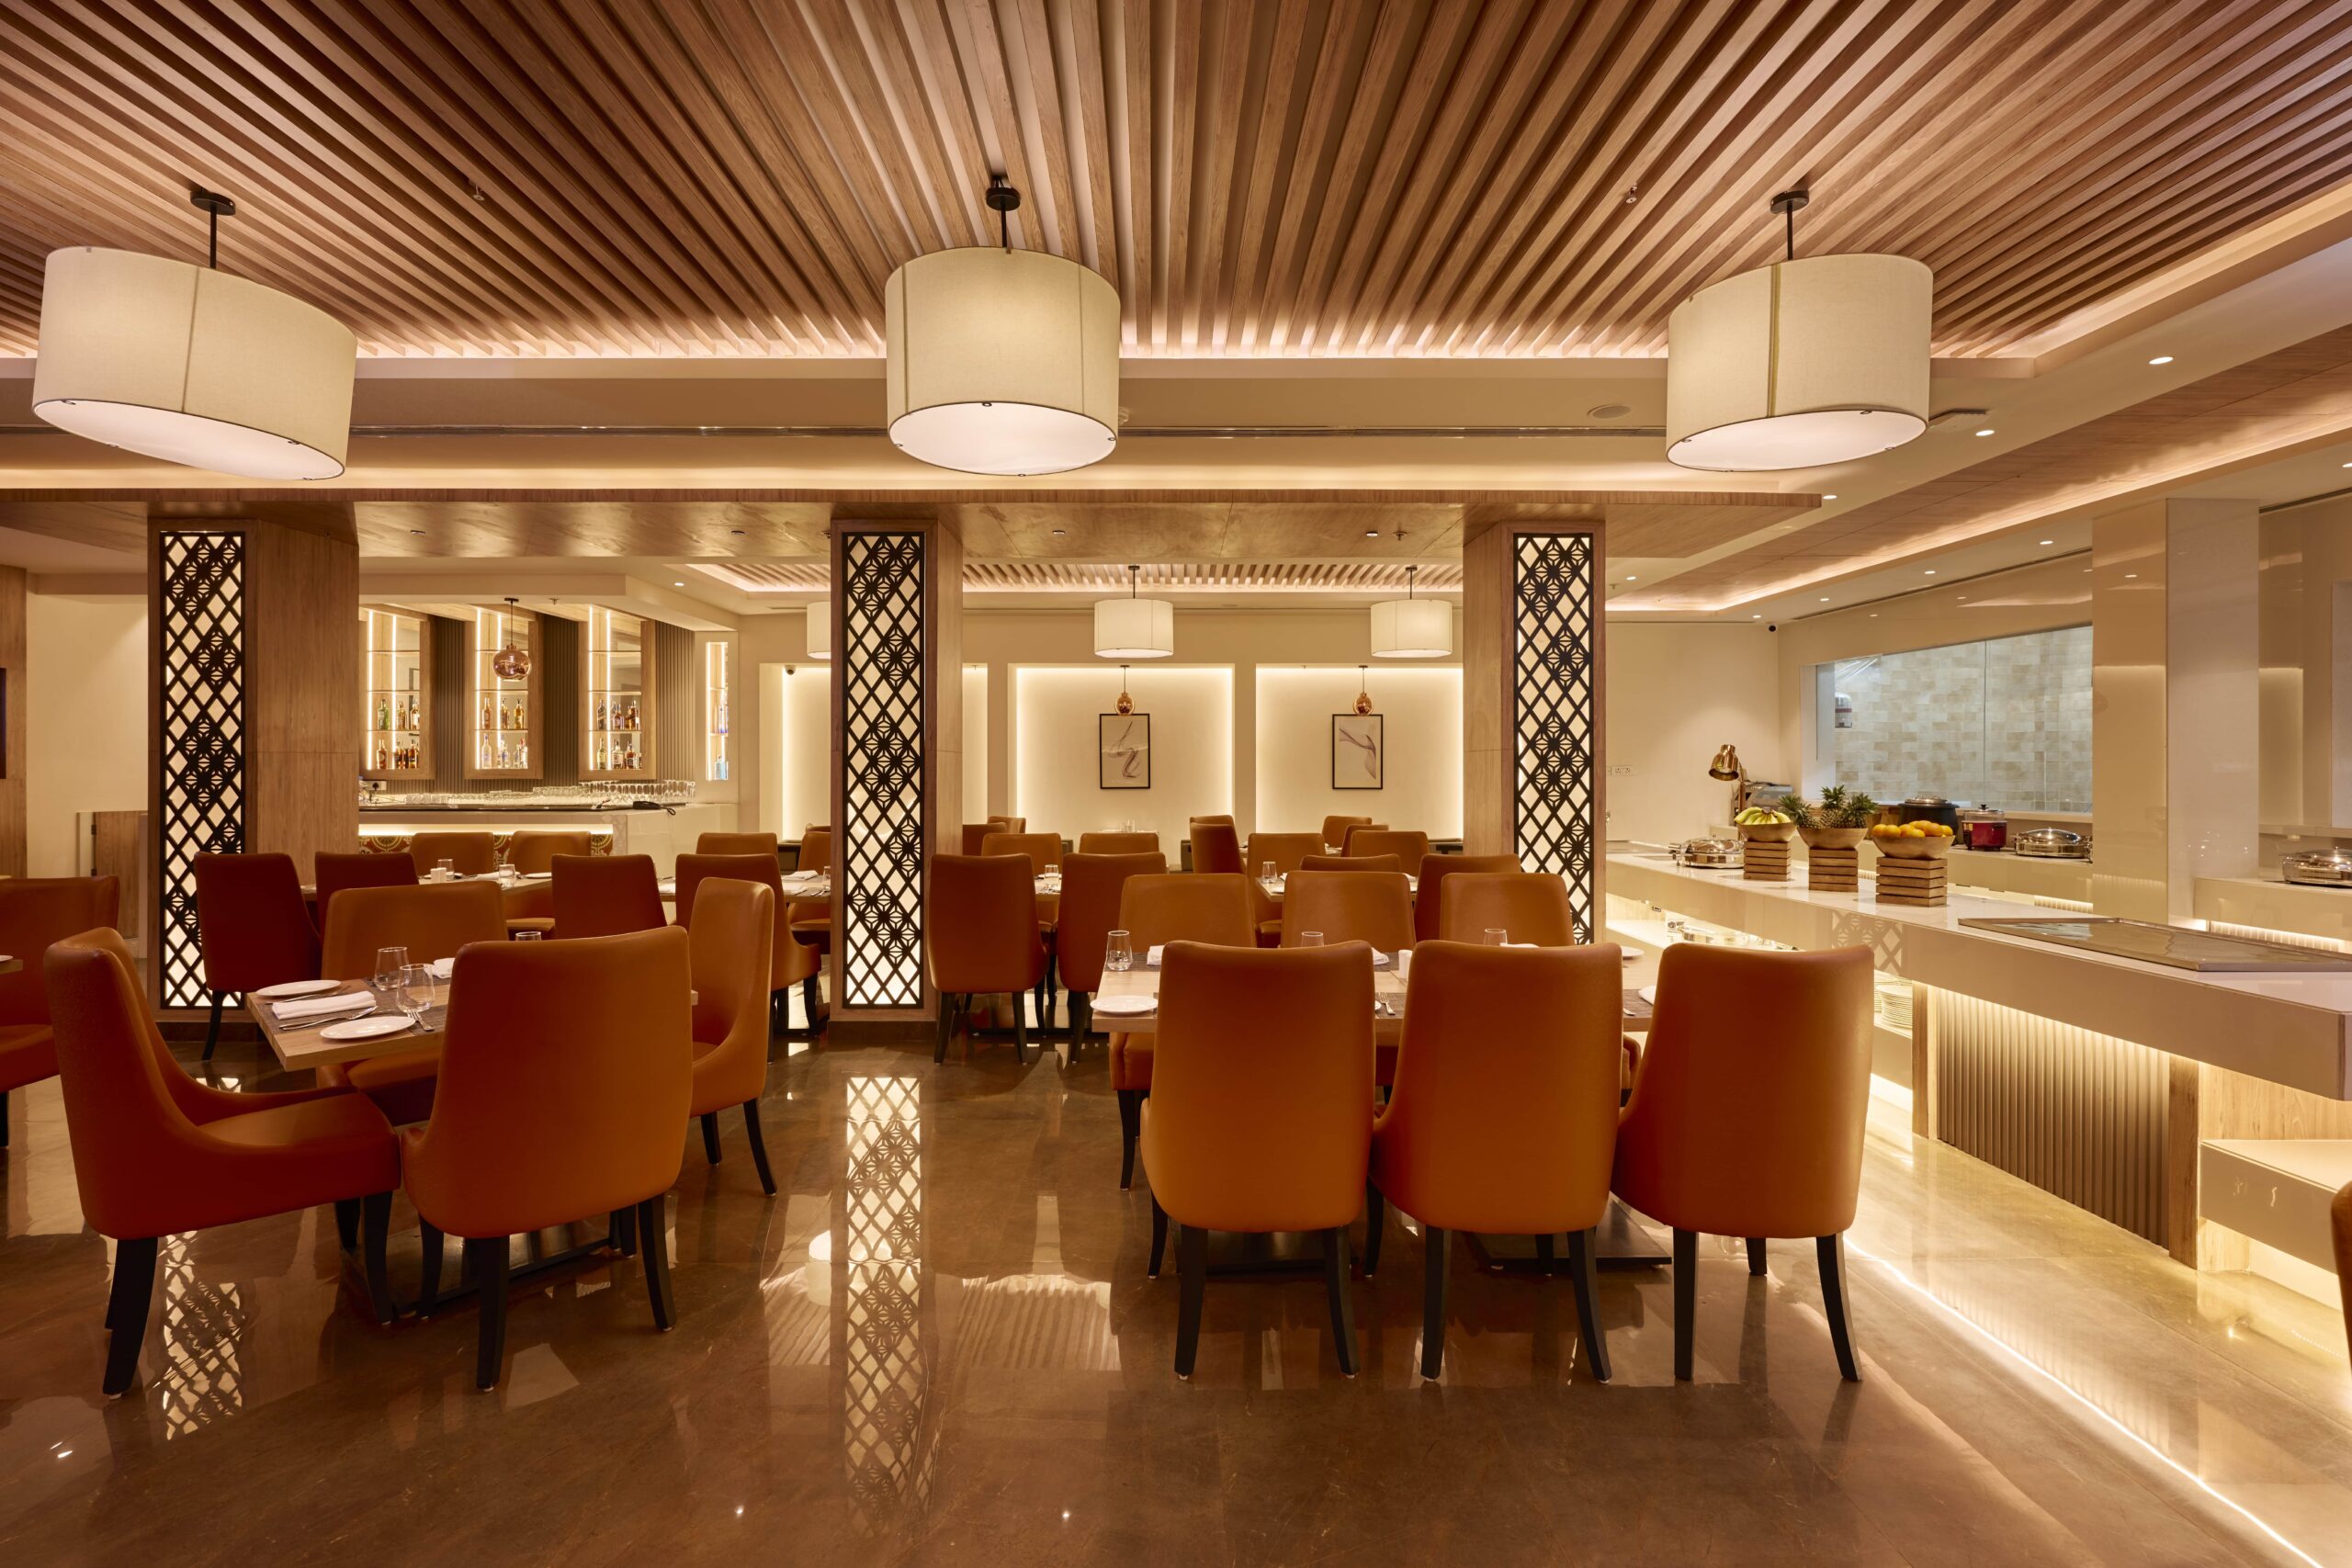 Sarovar Hotels Expands Presence in Delhi NCR with the Inauguration of Delite Sarovar Portico, Faridabad